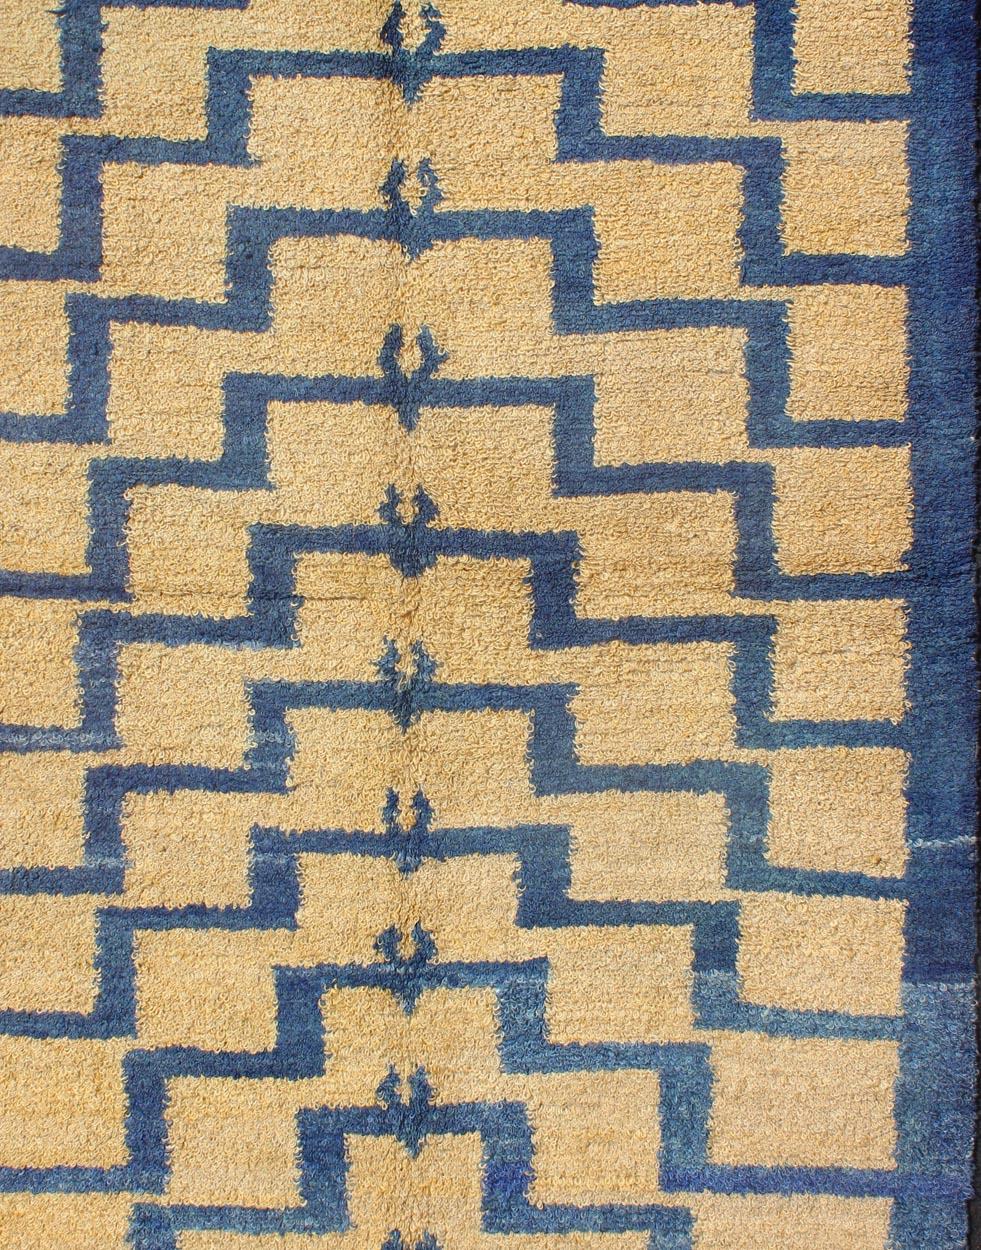 This vintage Tulu from mid-20th century Turkey boasts a mid century modern design with interconnected tribal pattern. The multi-tiered pattern consists of soft gold outlines set on a blue field. The contrast of color adds a particular depth to